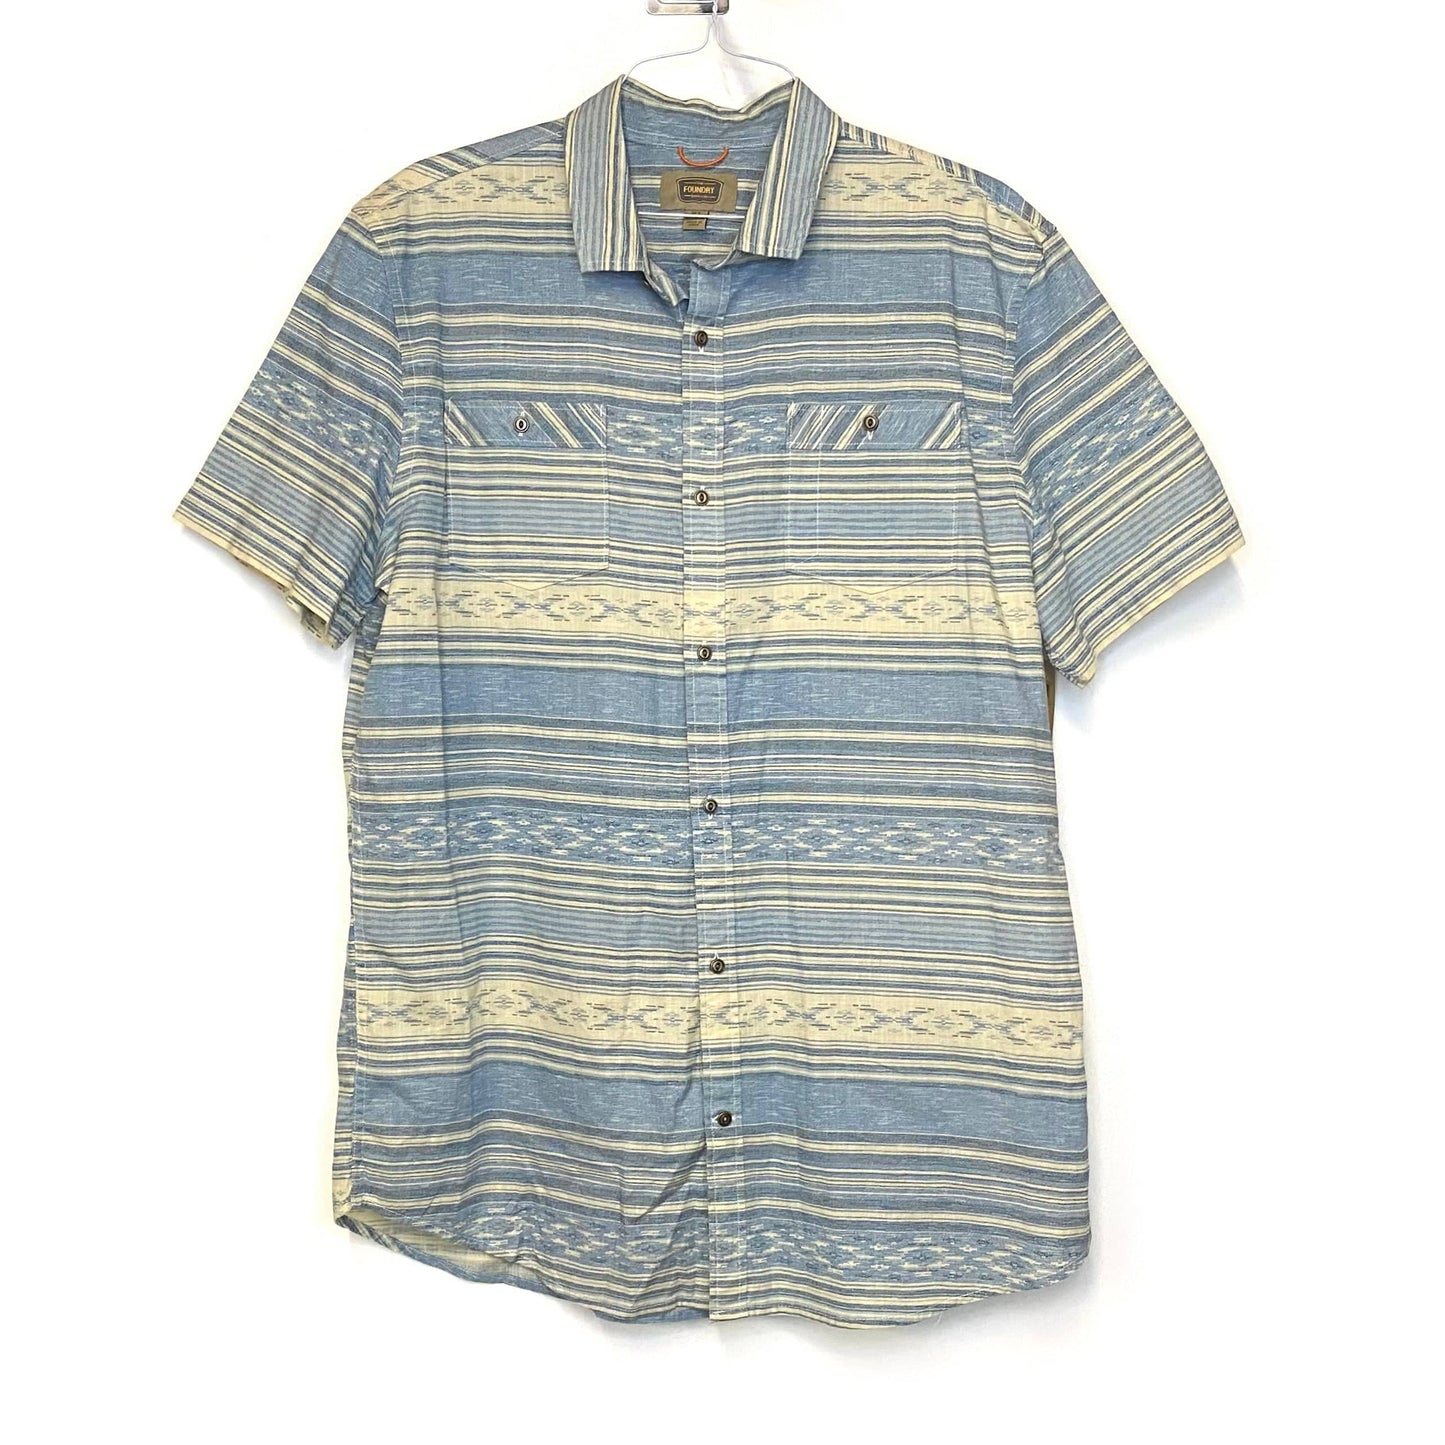 Foundry Supply Mens Size XLT Blue Cream Striped Shirt Casual Button-Up S/s